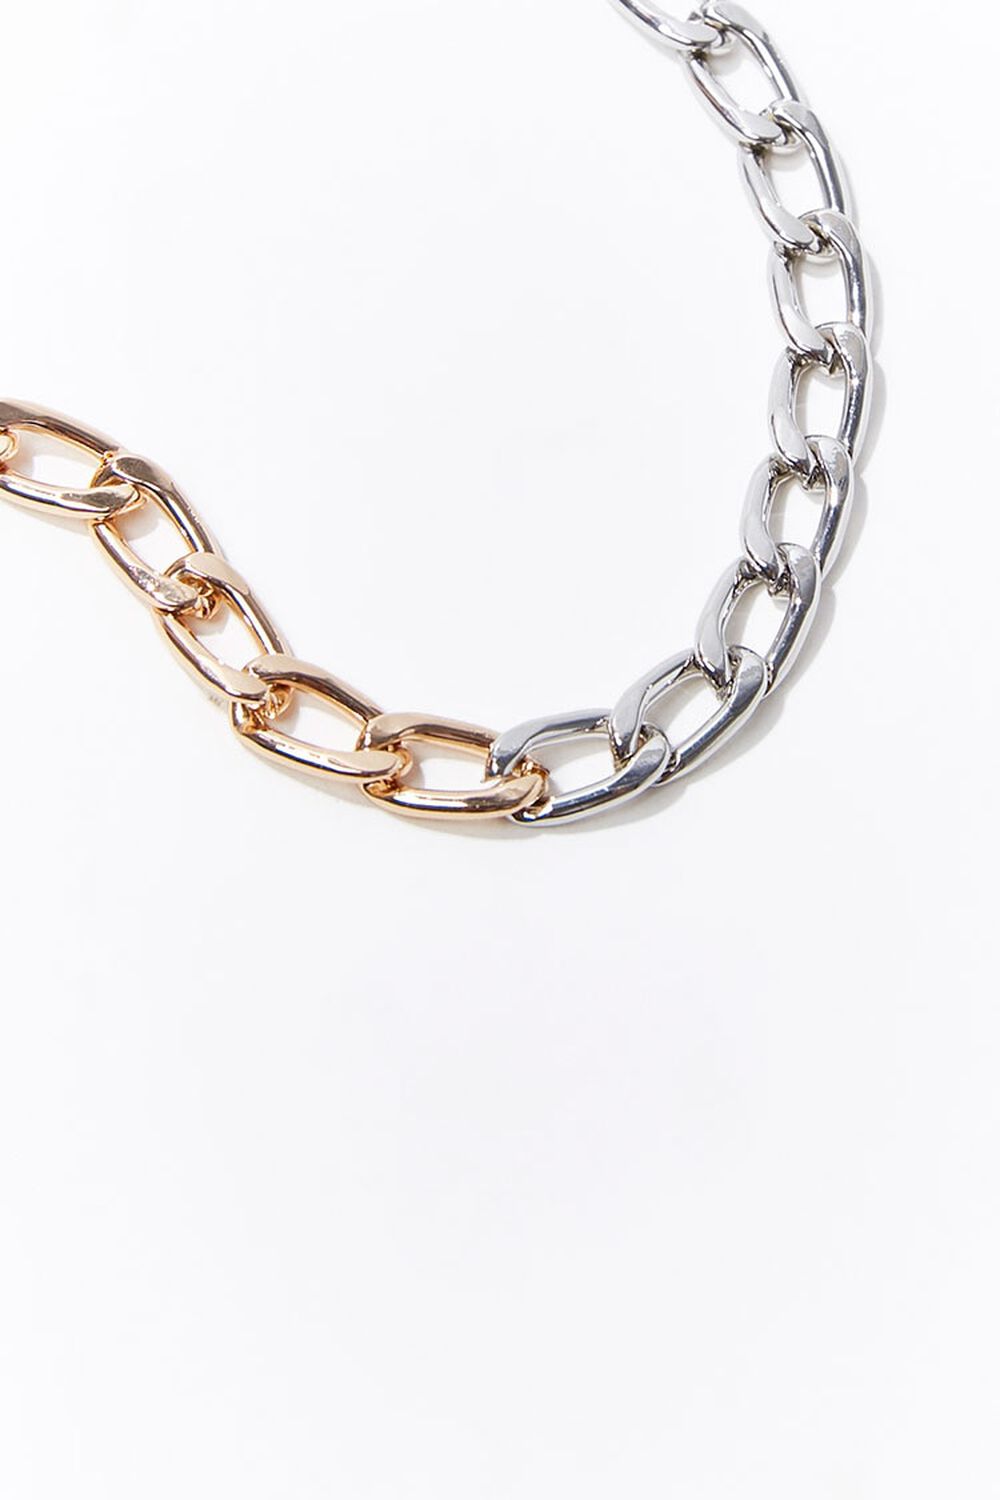 GOLD/SILVER Duo-Tone Chain Bracelet, image 1